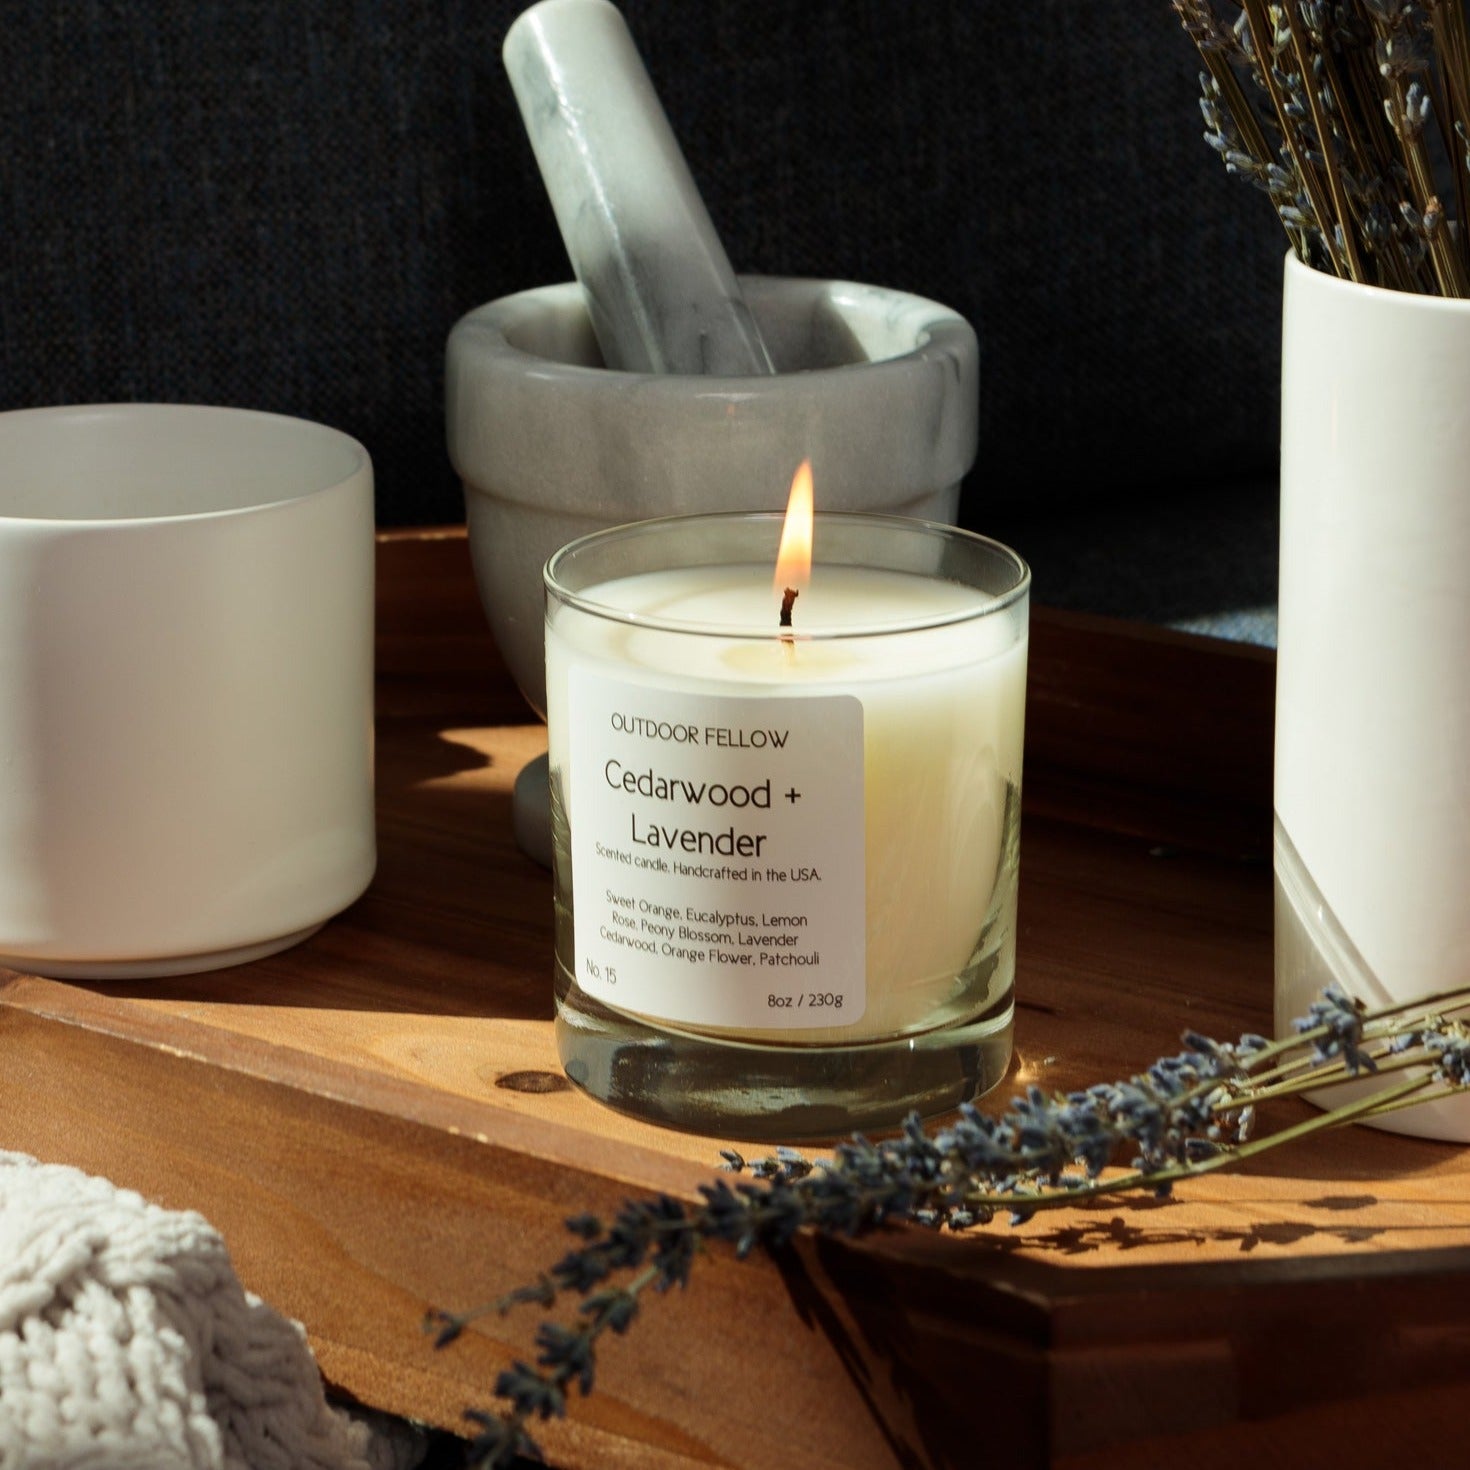 Cedarwood and Lavender candle on a wooden tray in a bedroom